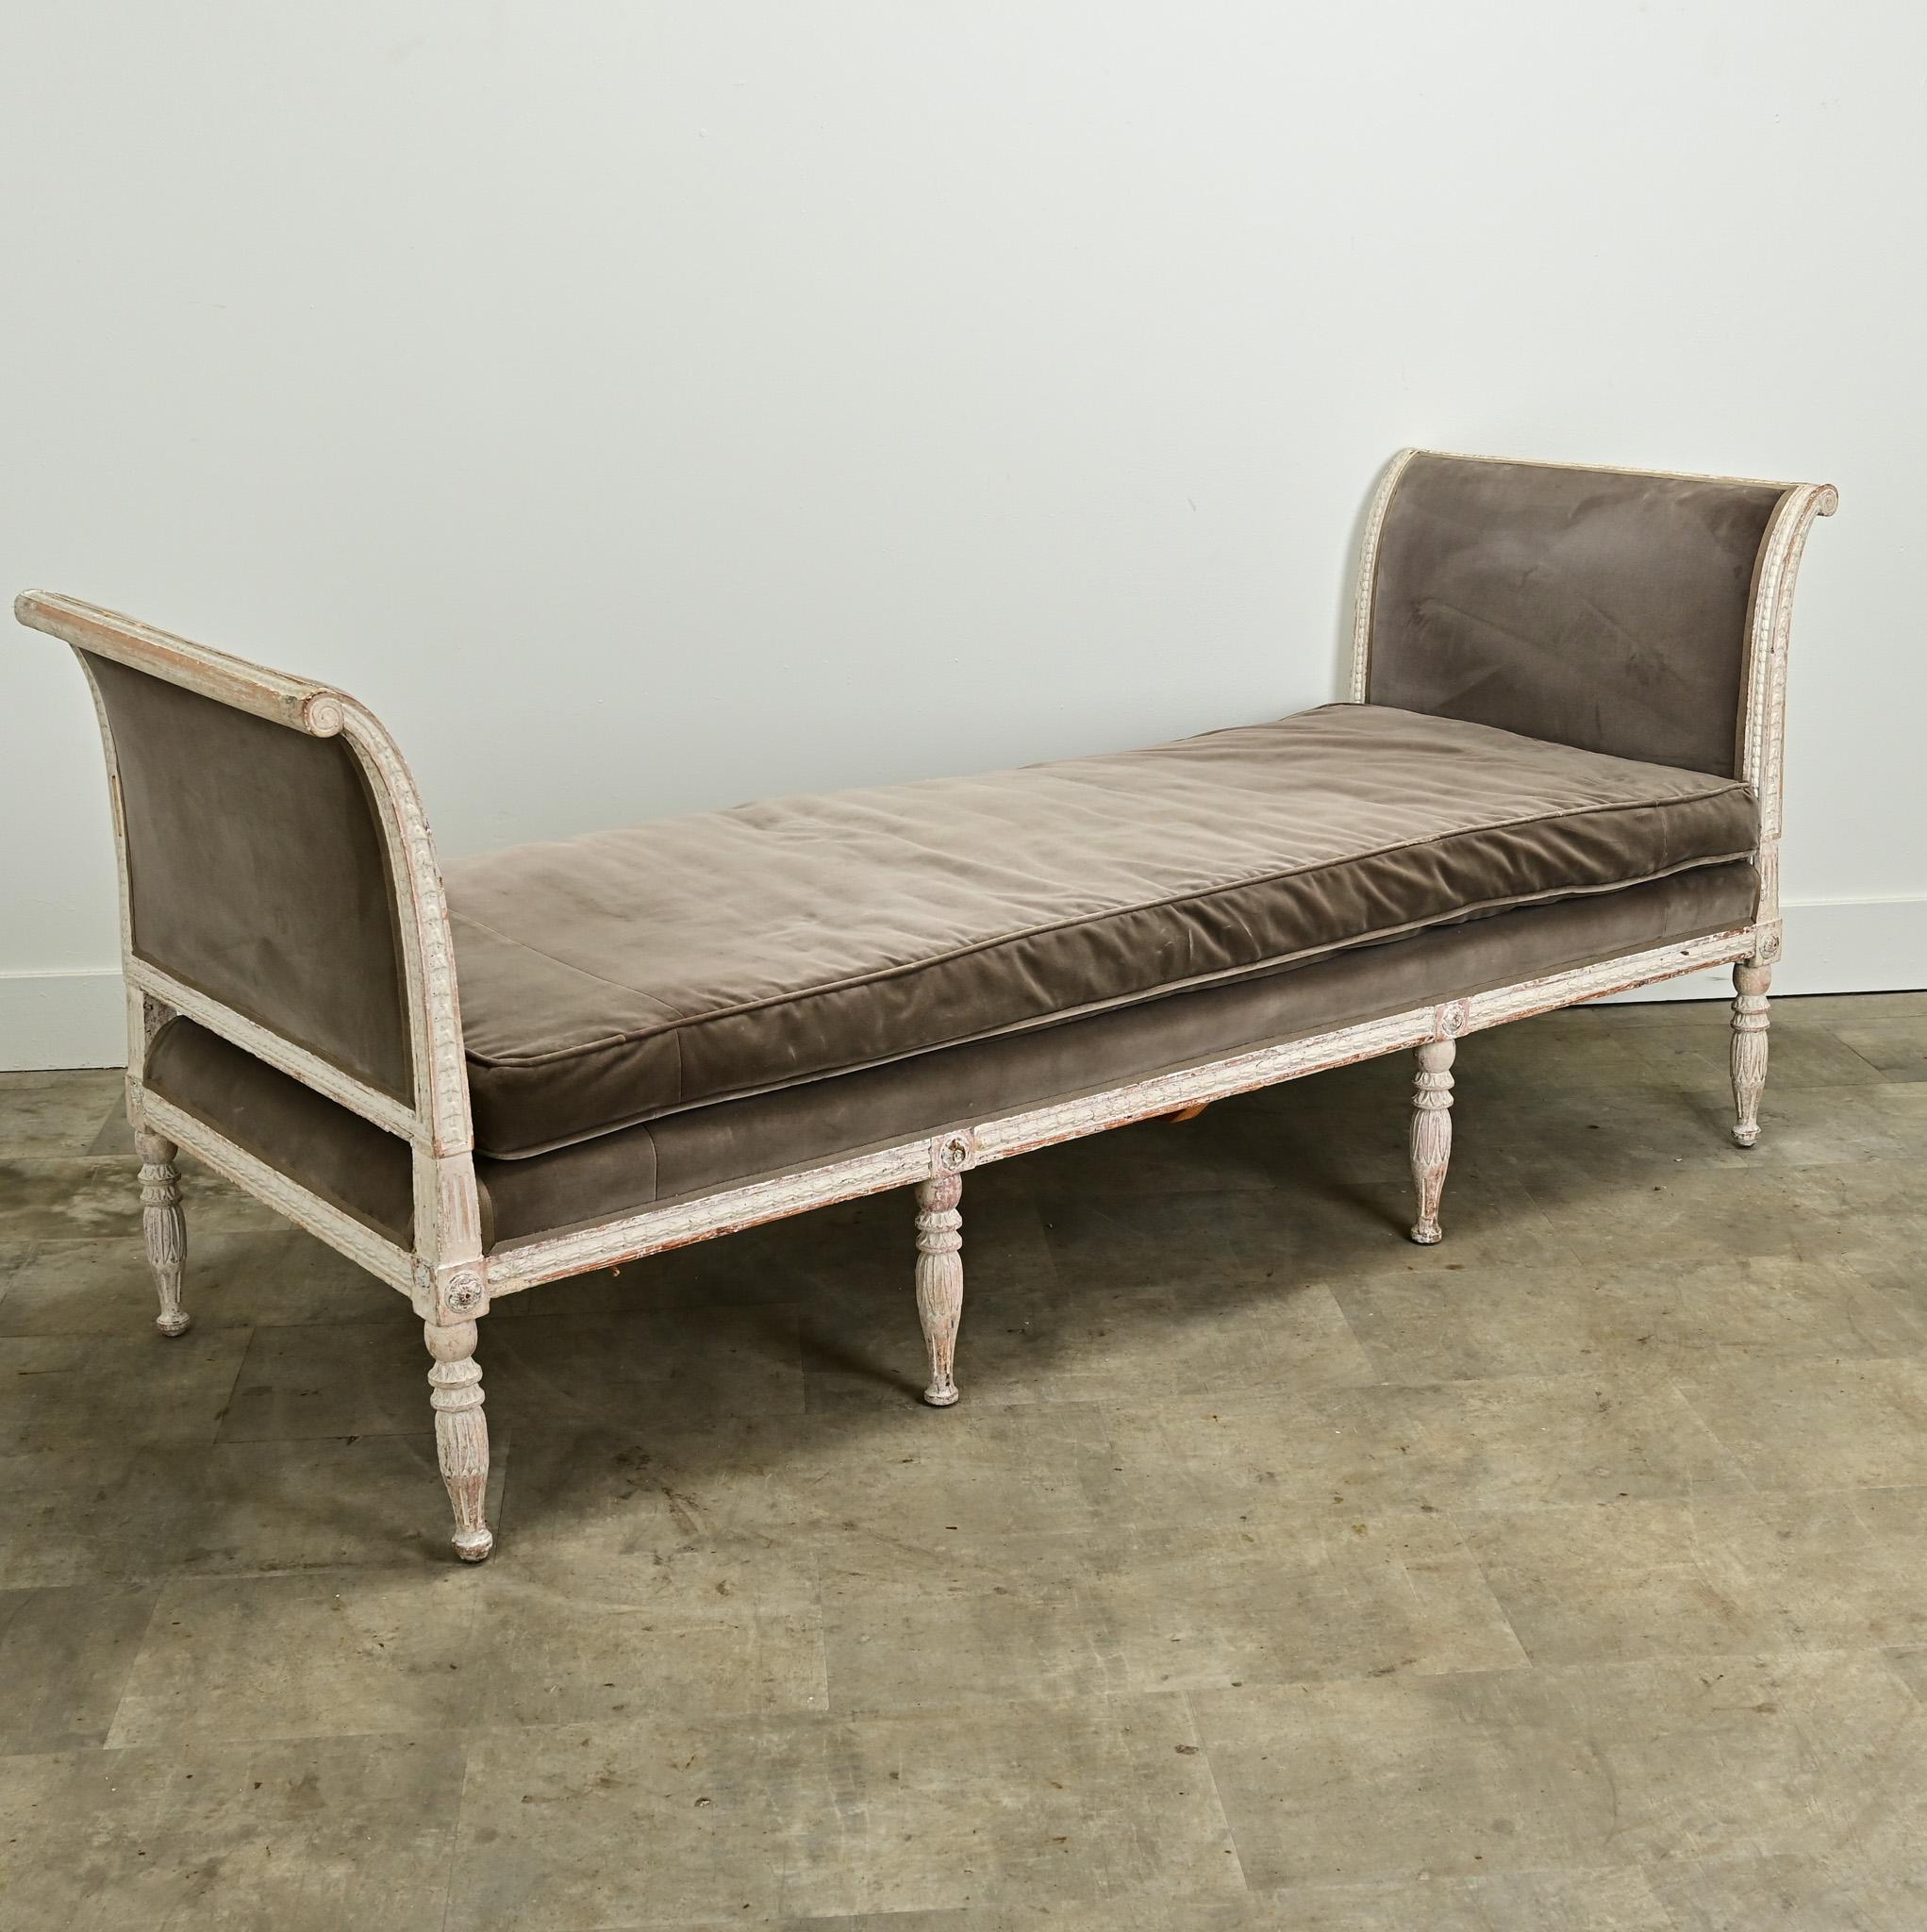 An impressive, long Swedish 18th Century Louis XVI daybed. The sides of this daybed are the same height and are carved with Louis XVI style motifs. The bed frame is upholstered in a comfortable worn velvet, matching its removable cushion. This